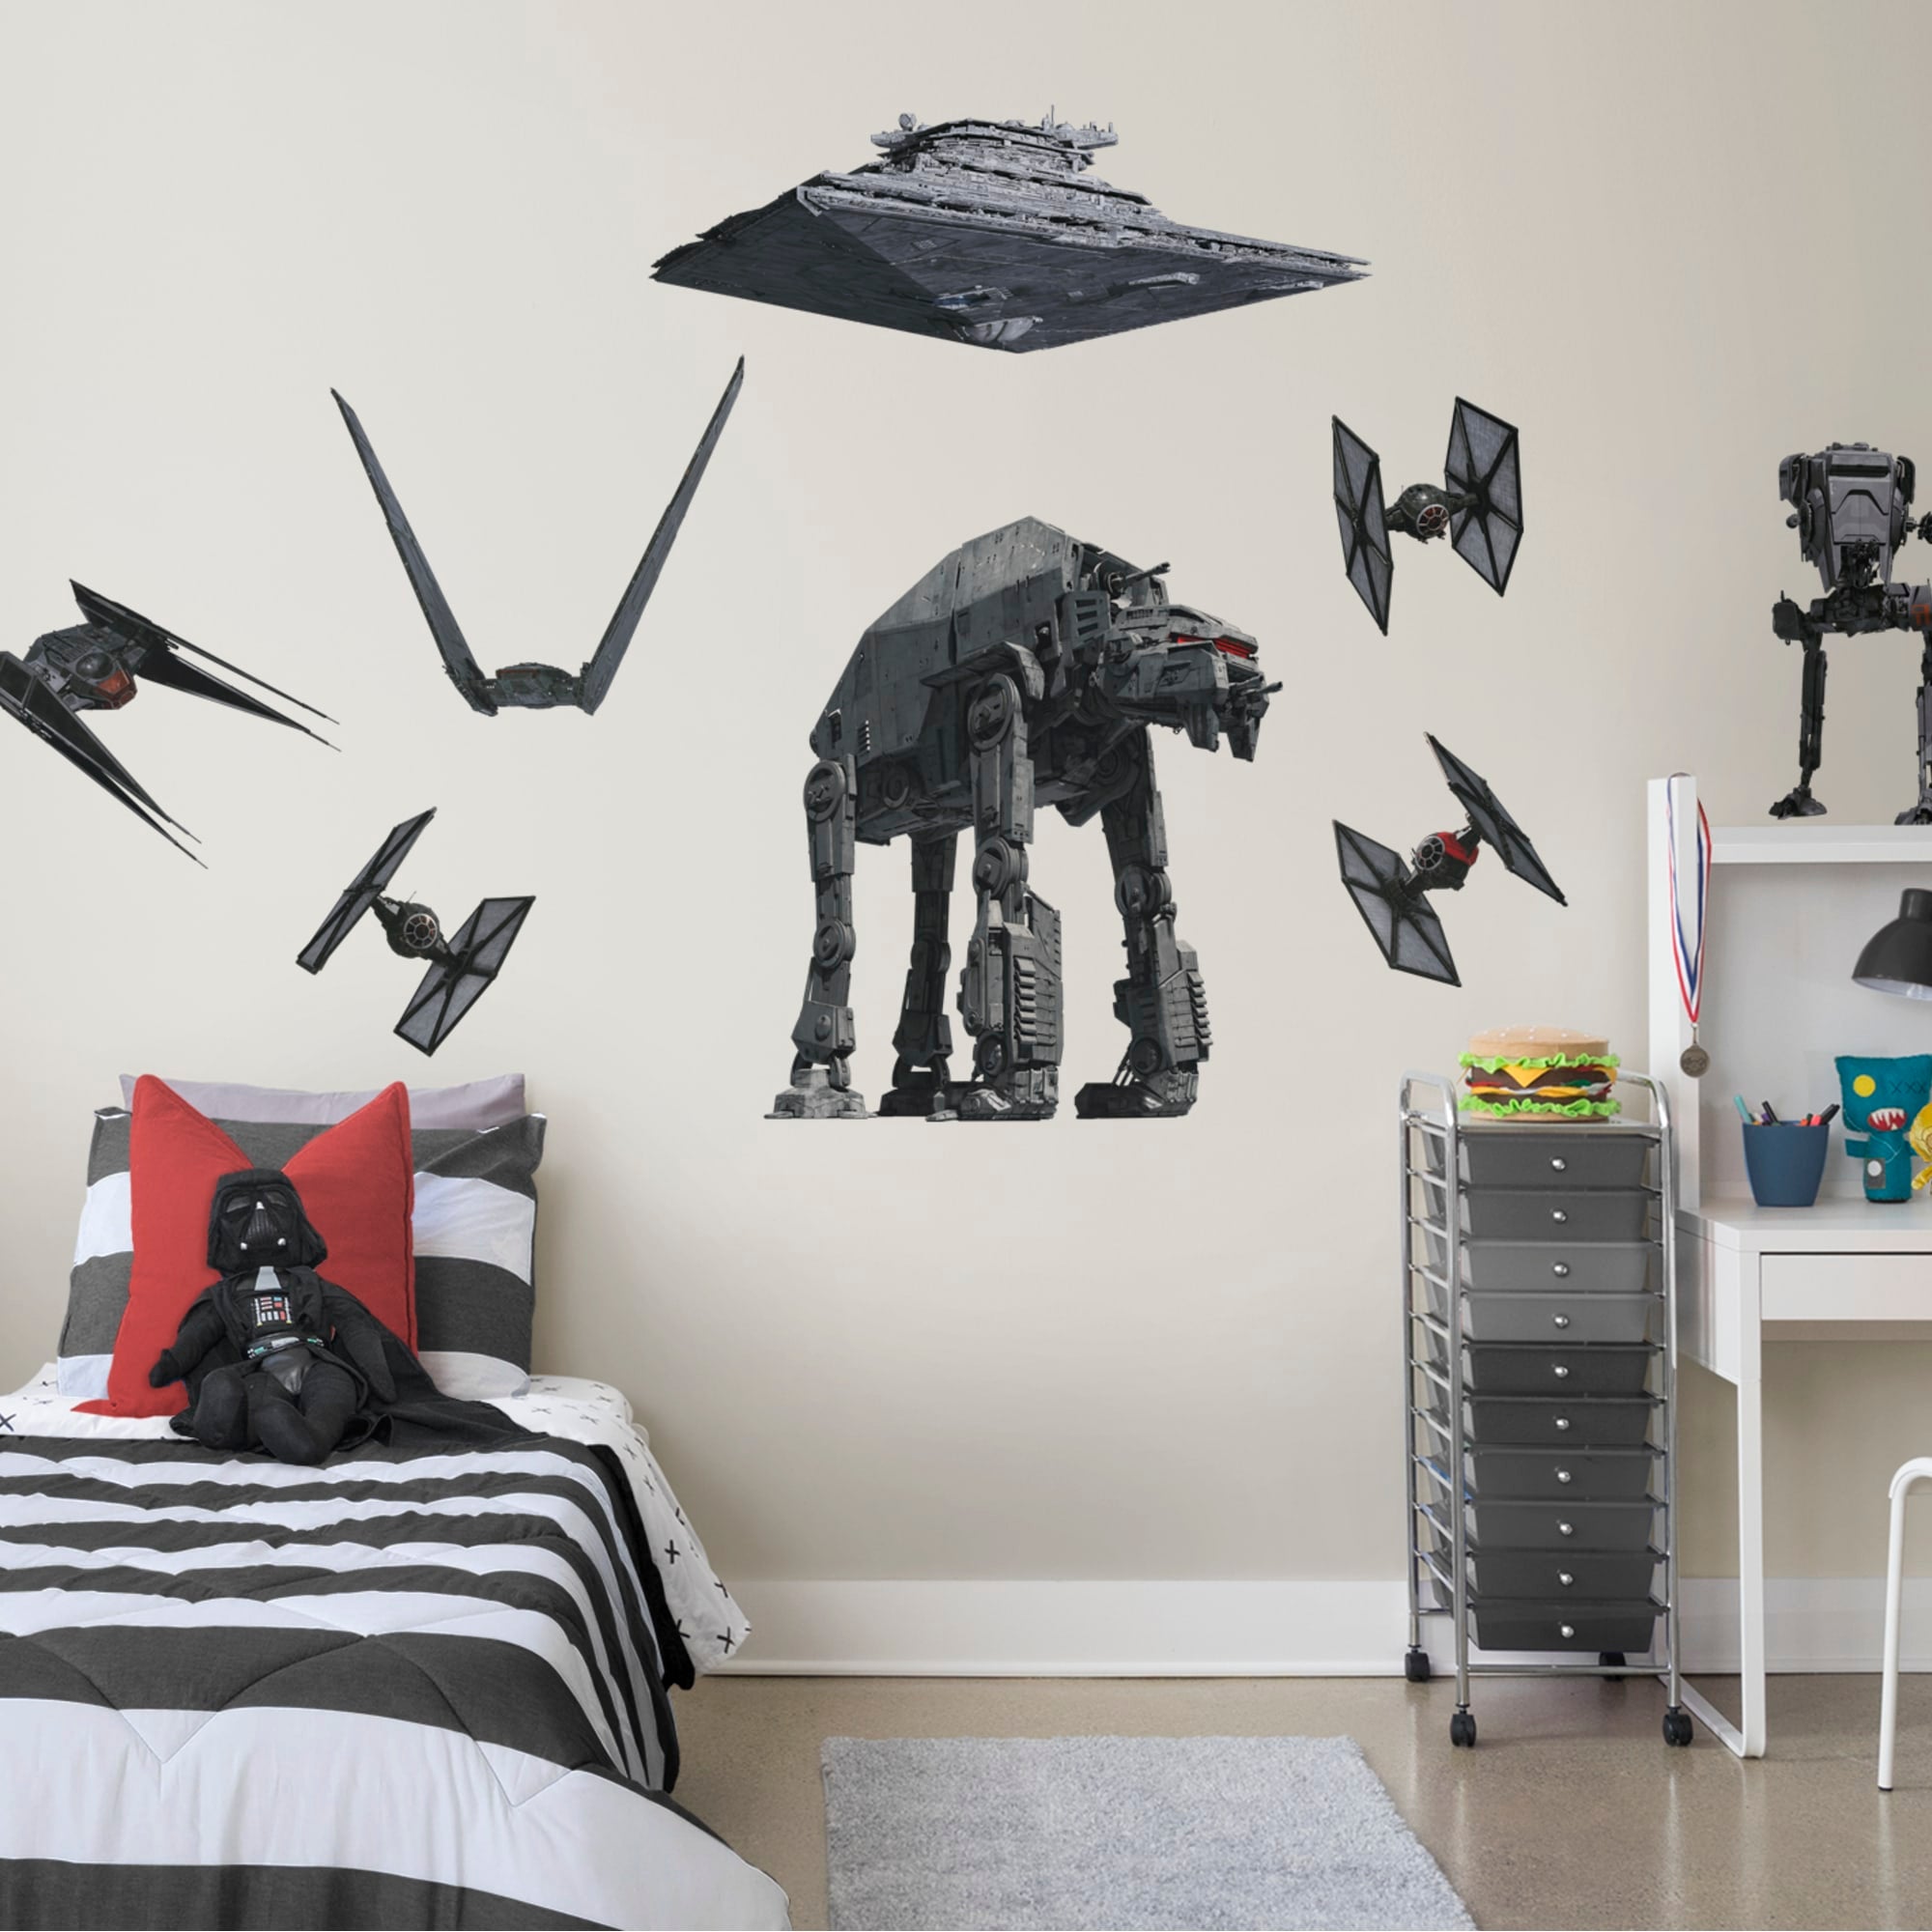 First Order Vehicles Collection - Officially Licensed Removable Wall Decals 30.0"W x 20.0"H by Fathead | Vinyl